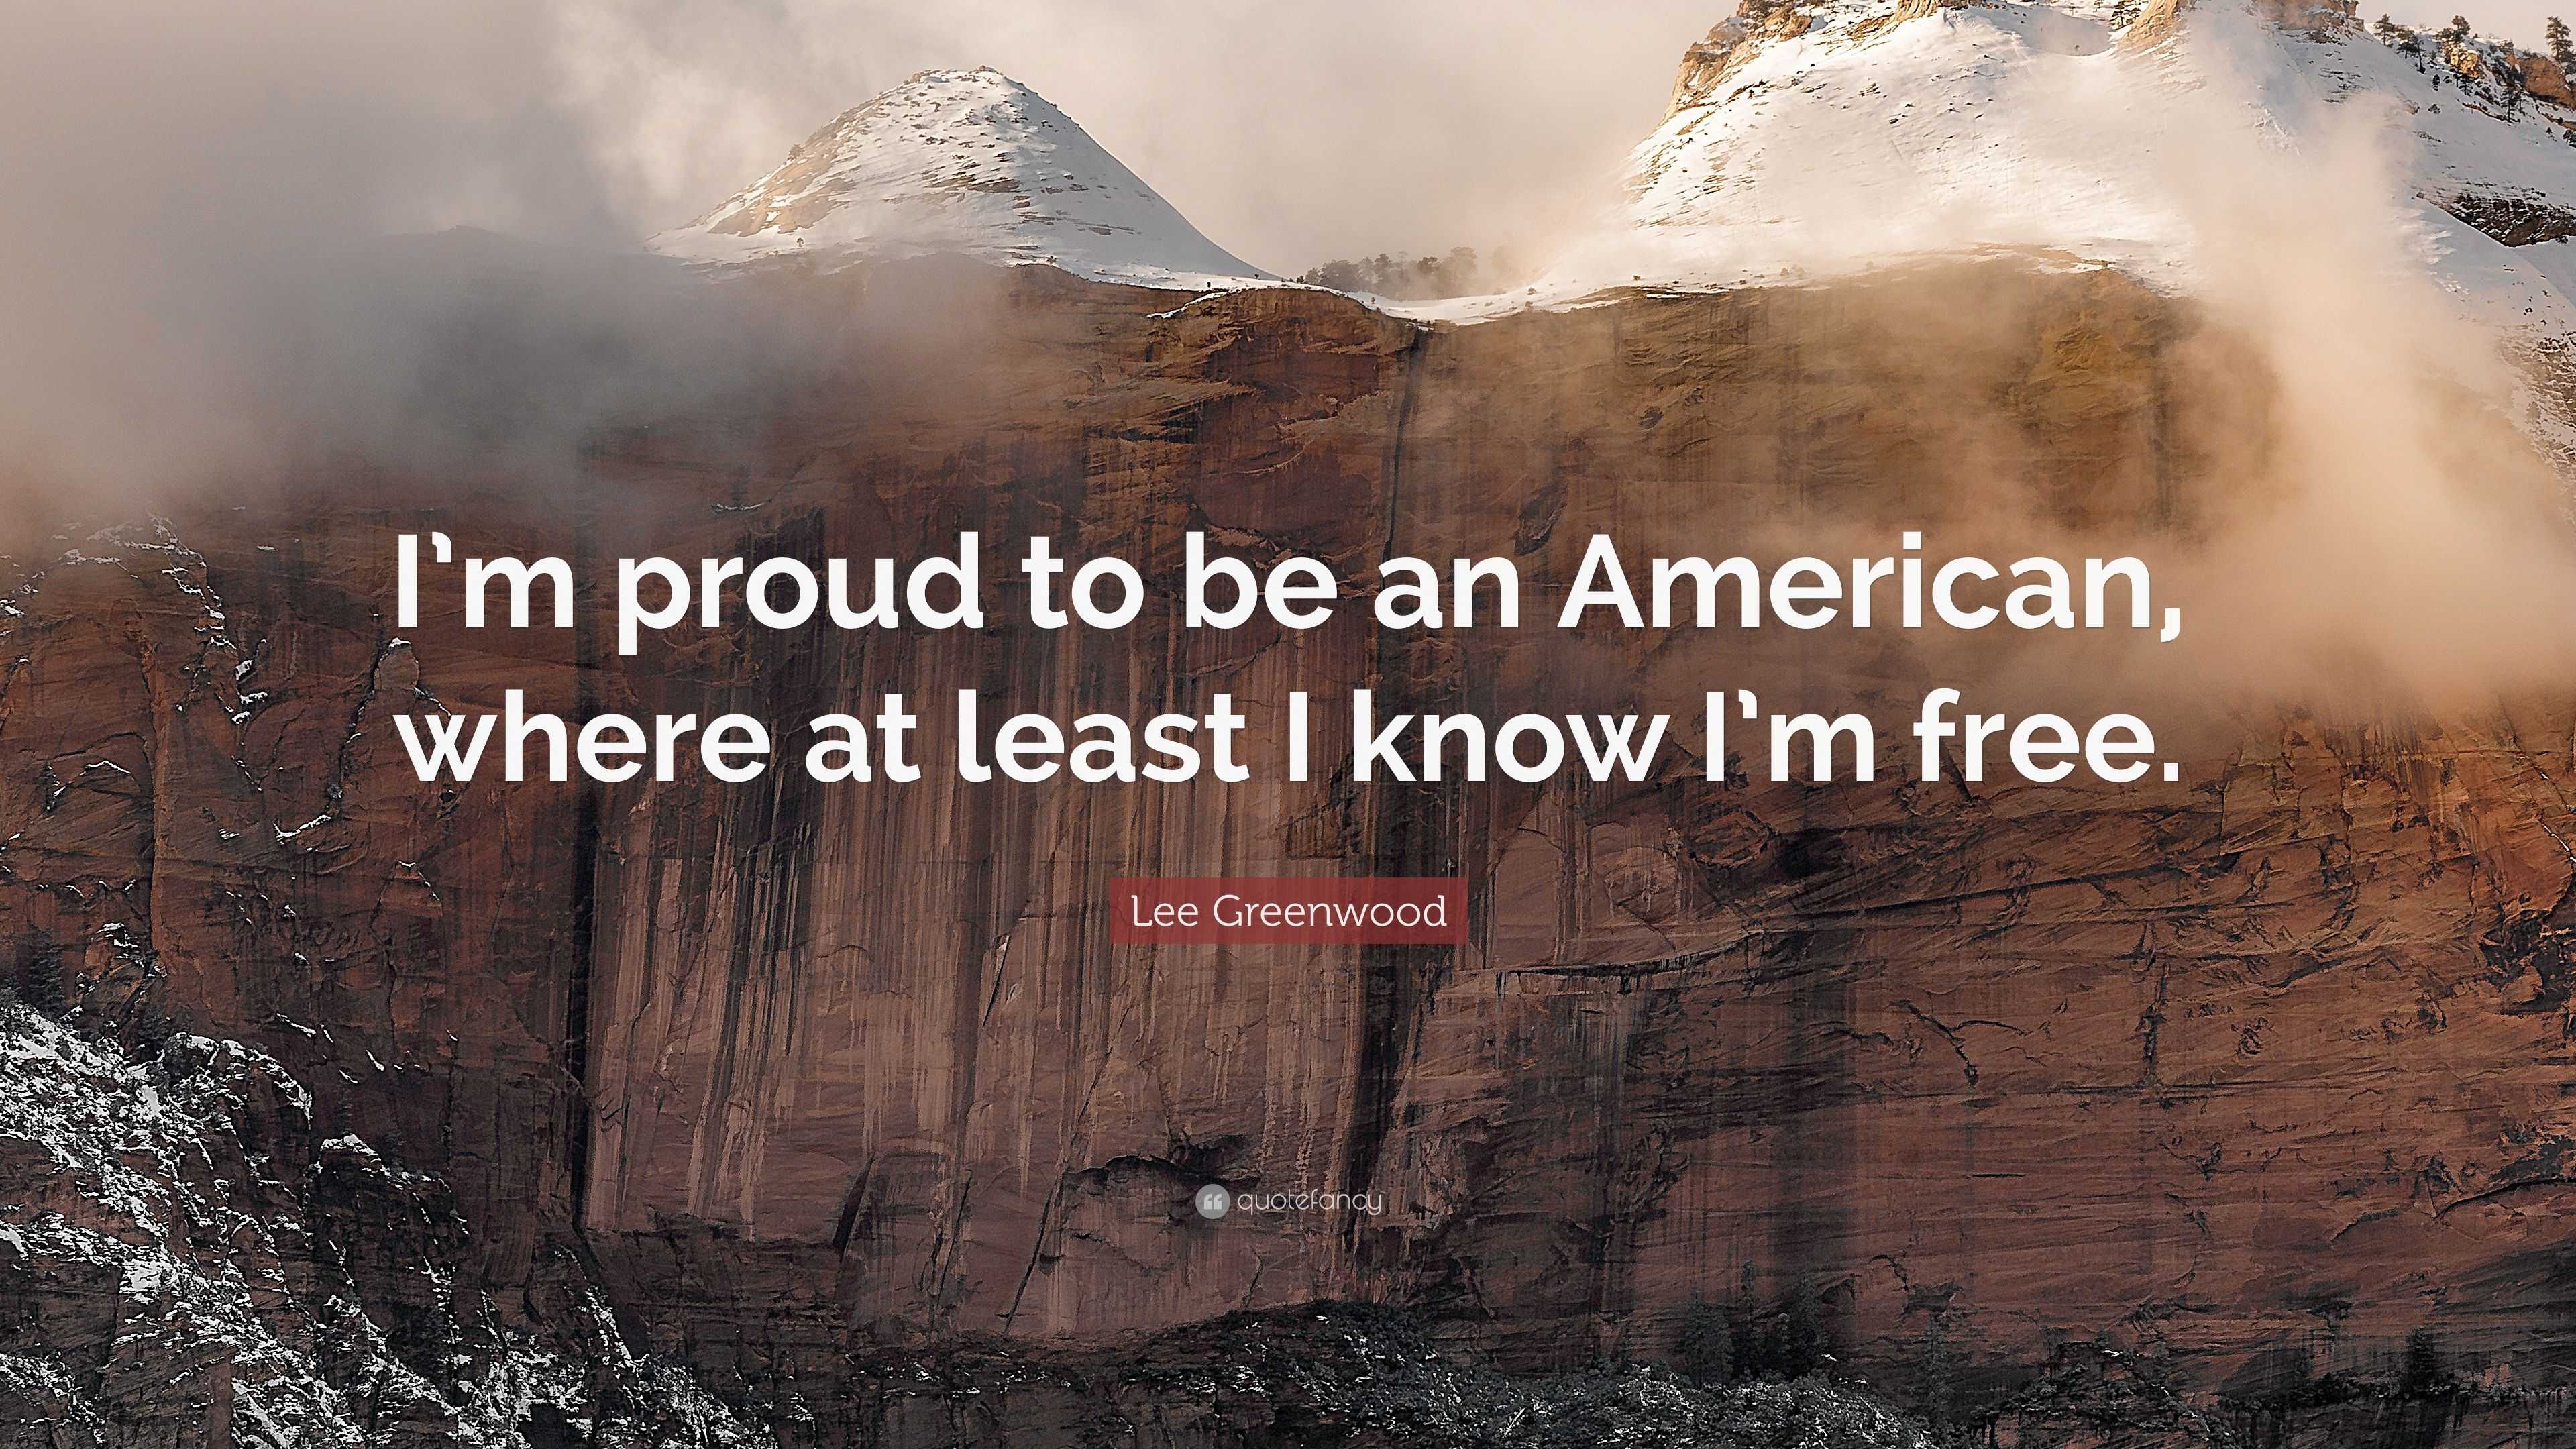 Lee Greenwood Quote: “I'm proud to be an American, where at least I know I'